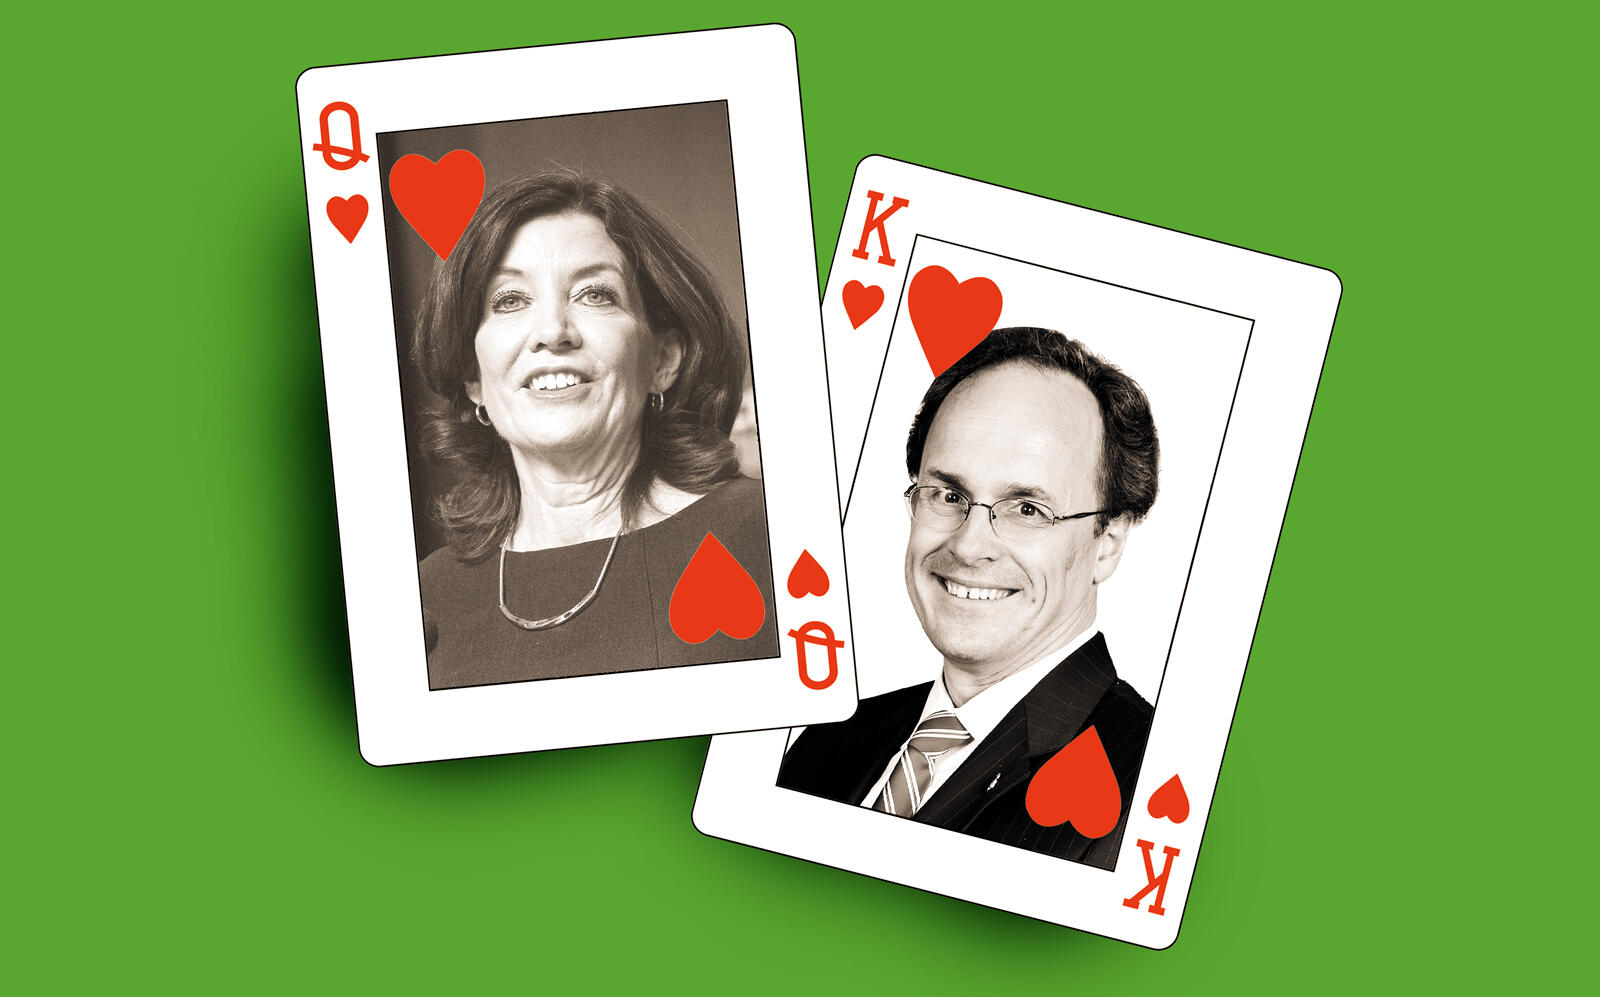 Kathy Hochul and William Hochul (Getty, Department of Justice/Wikimedia, iStock)